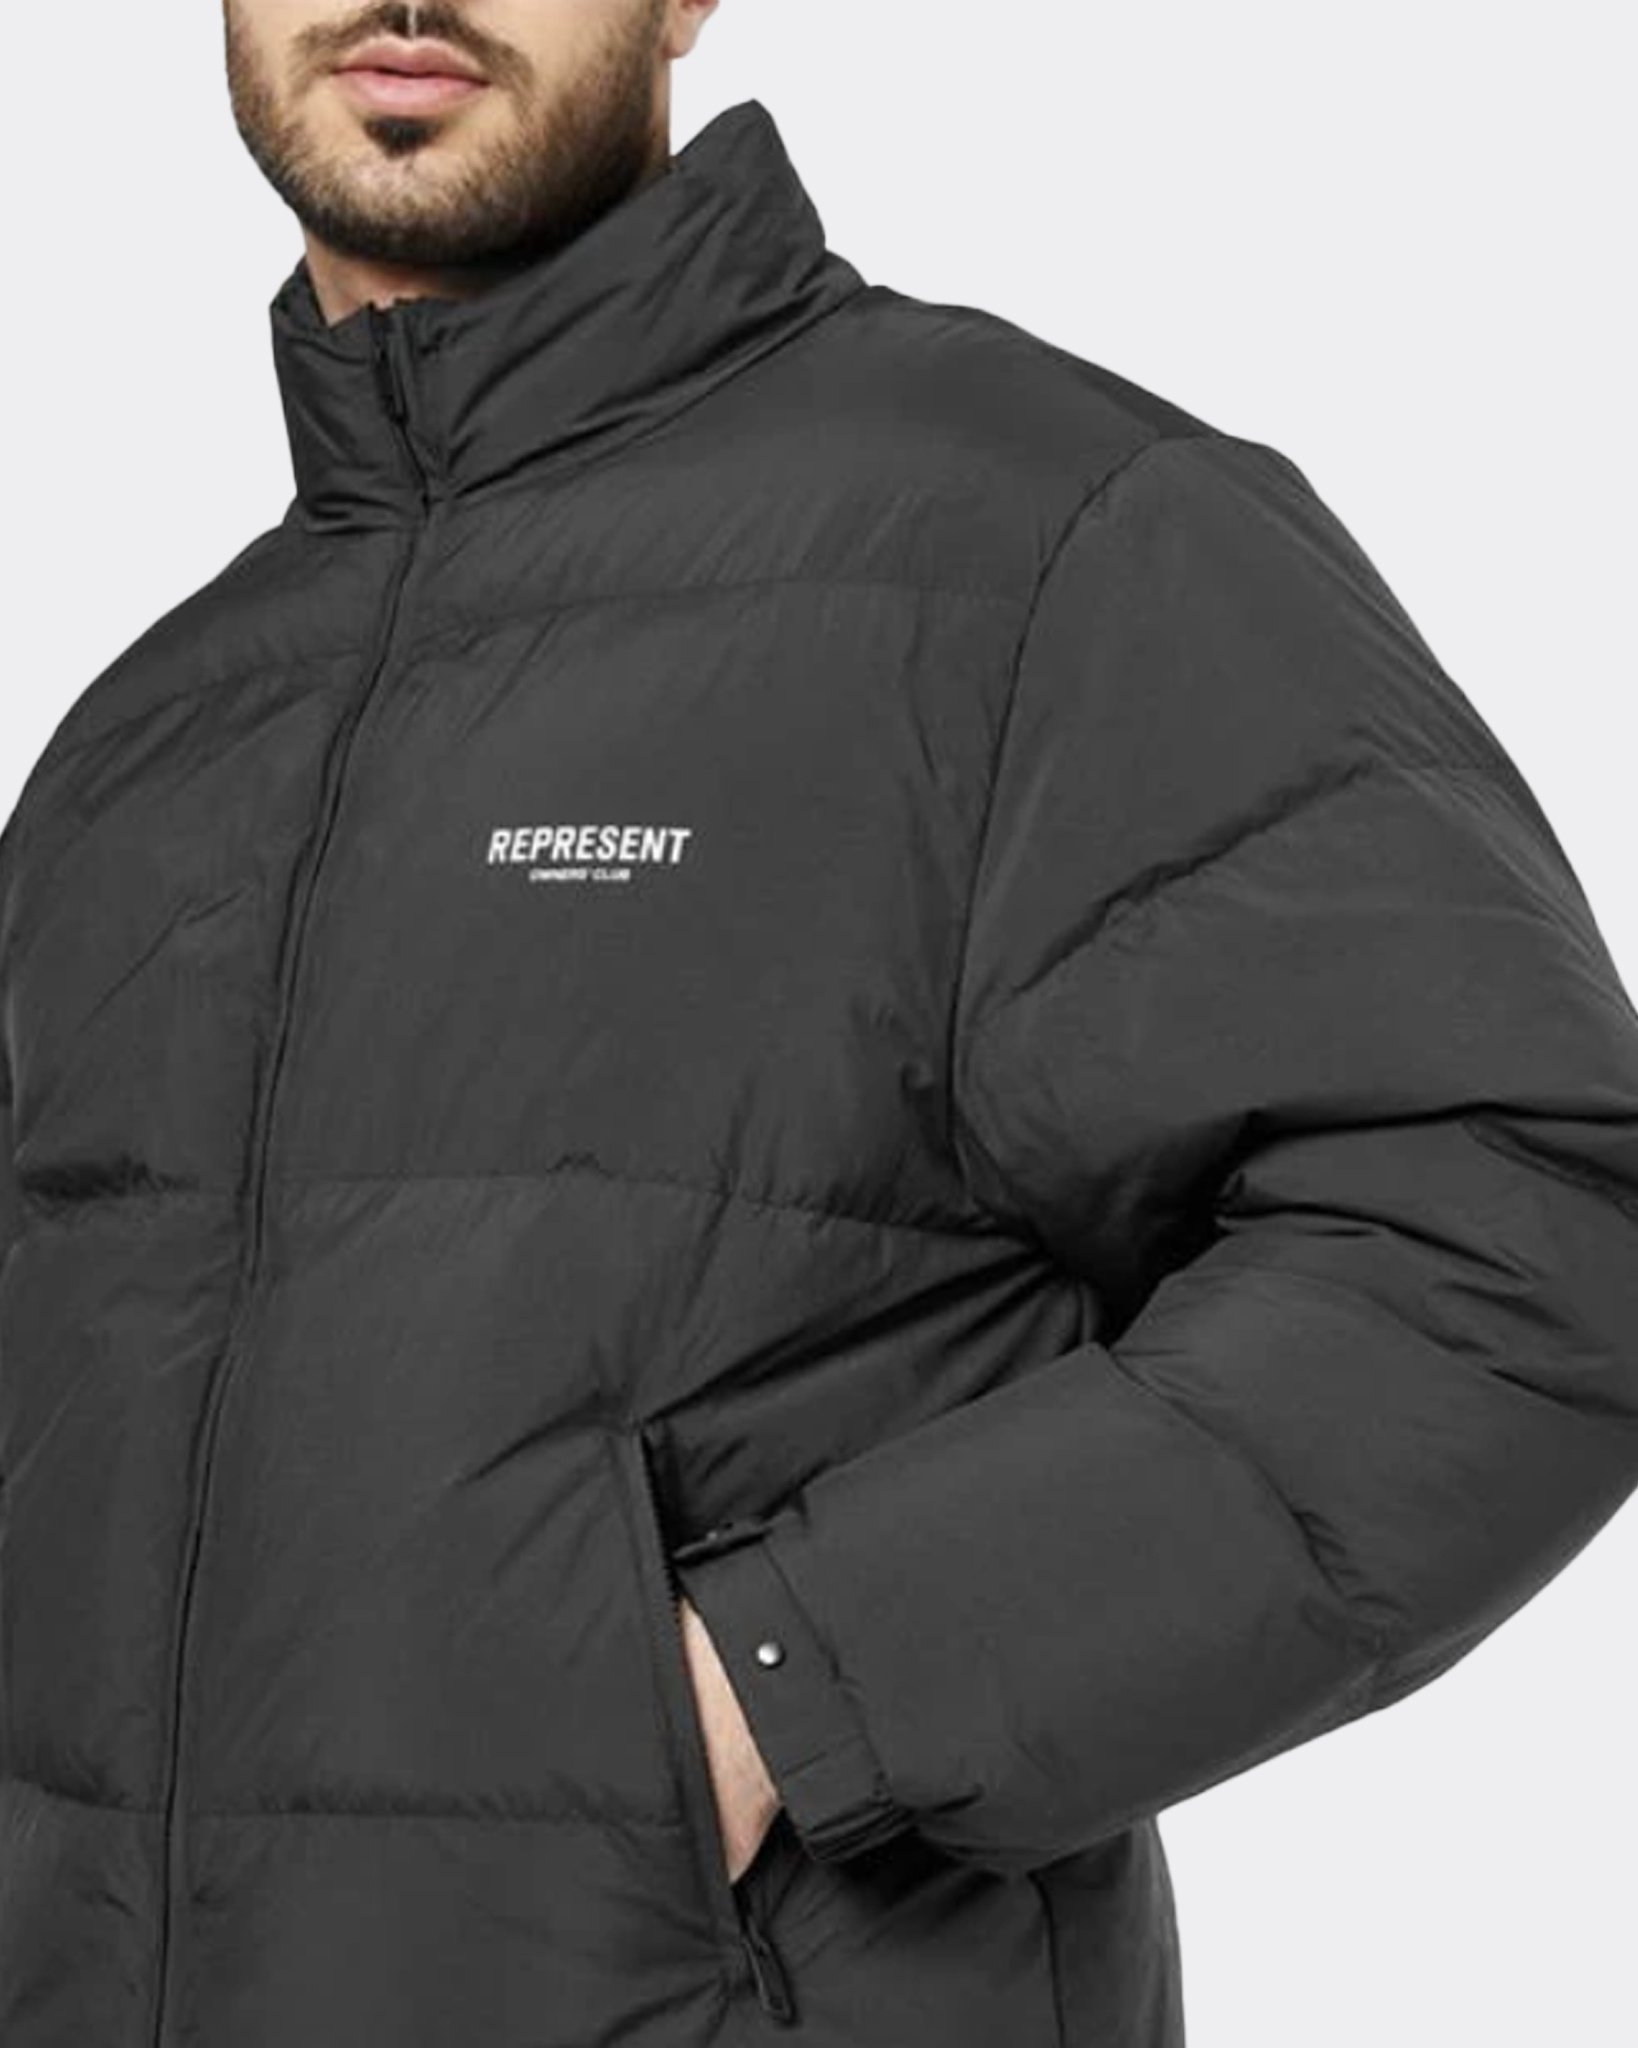 Represent Owners Club Down Jacket